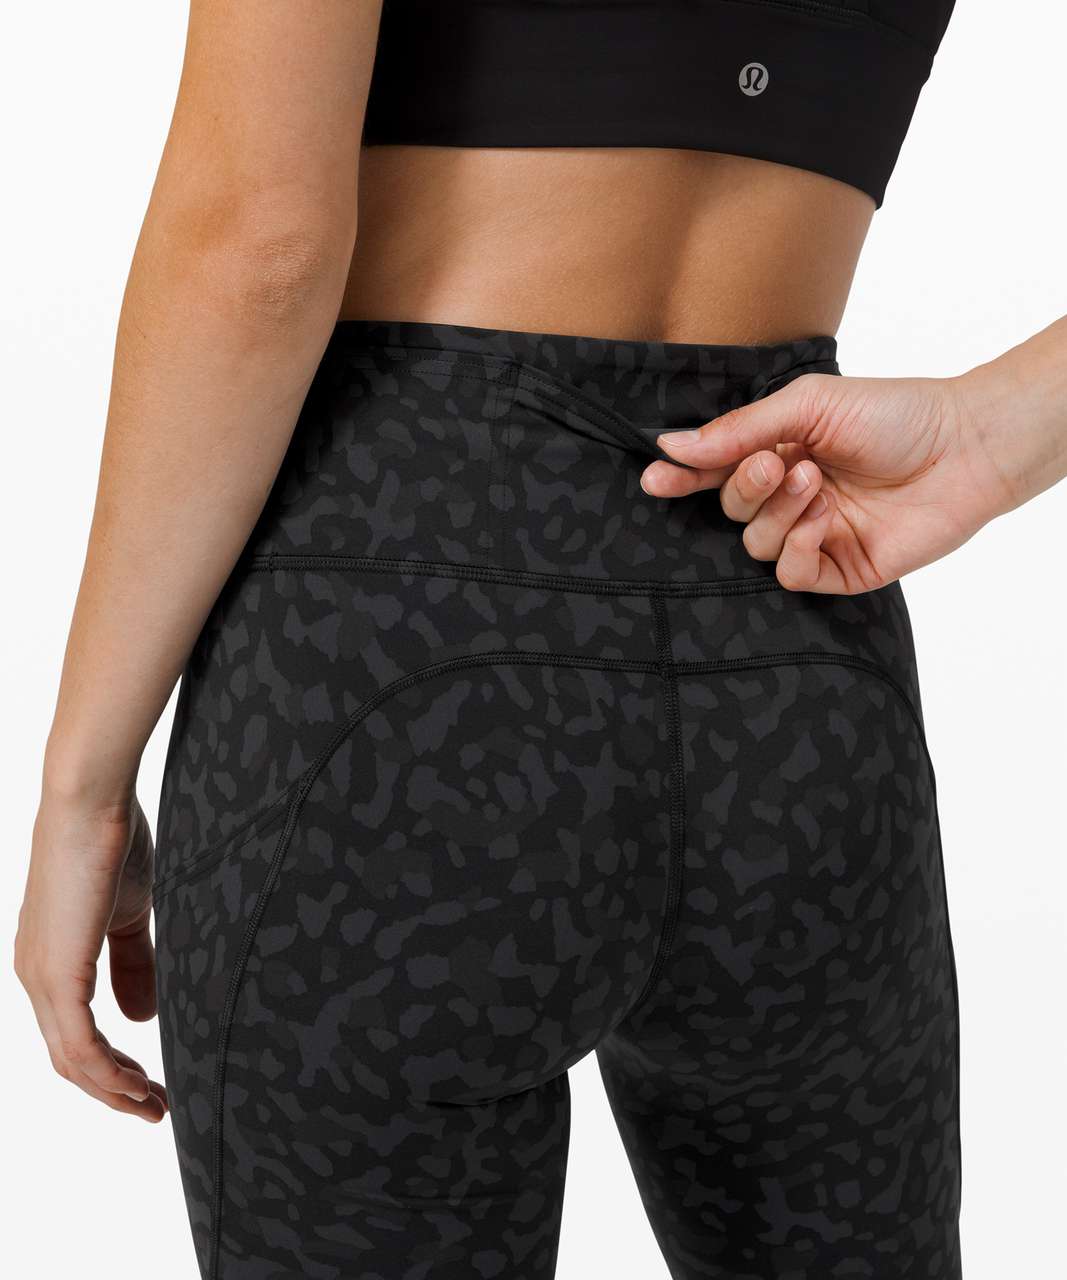 Lululemon Fast and Free High-Rise Crop 23" *Non-Reflective - Formation Camo Deep Coal Multi